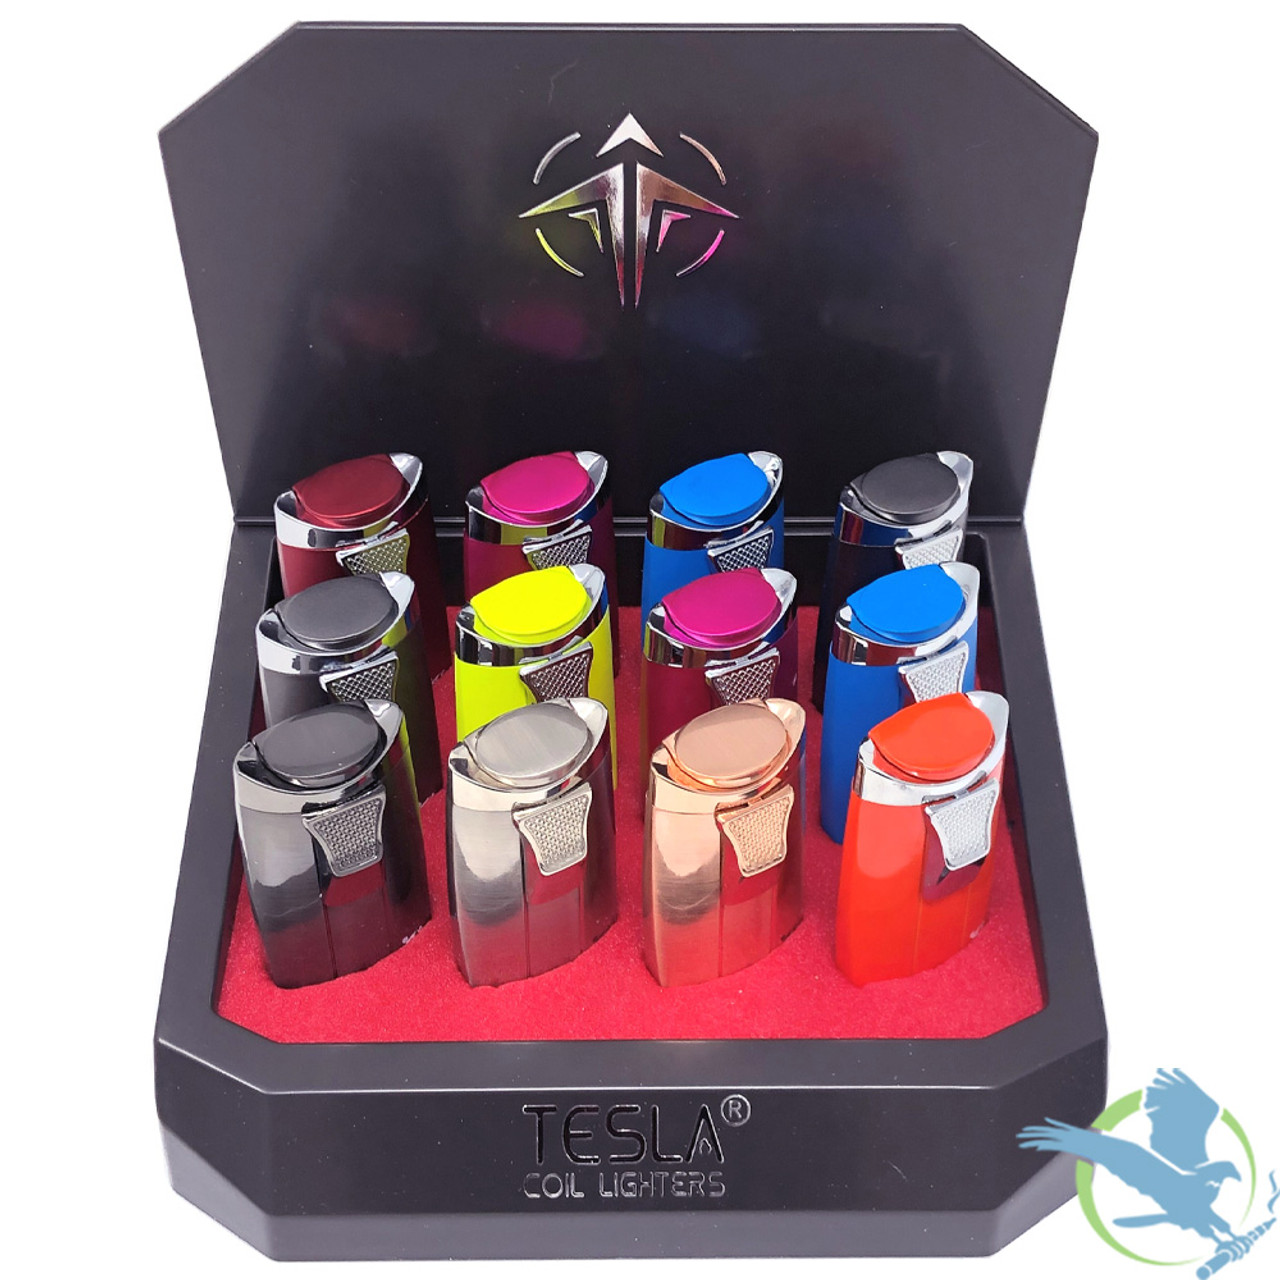 Tesla Coil Lighters Push Up Cap Dual Flame Adjustable Butane Torch Lighter  - Assorted Colors - Display of 12 [61608-T] (MSRP $15.00 Each)